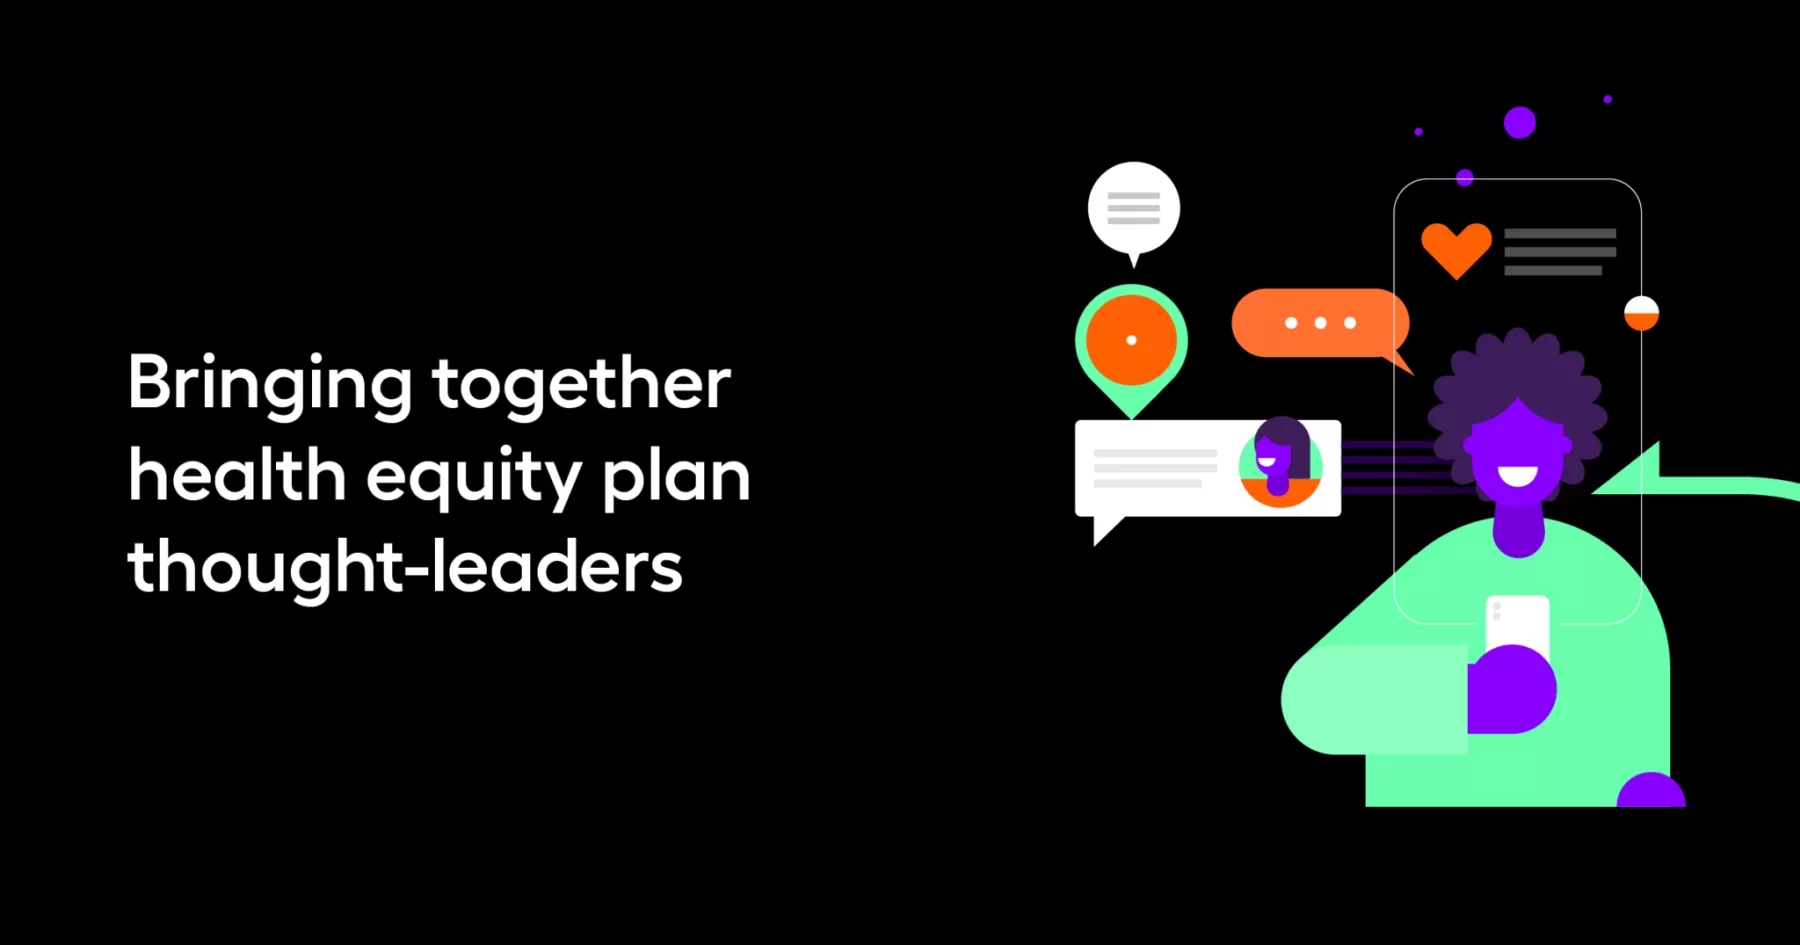 Bringing together health equity plan thought-leaders